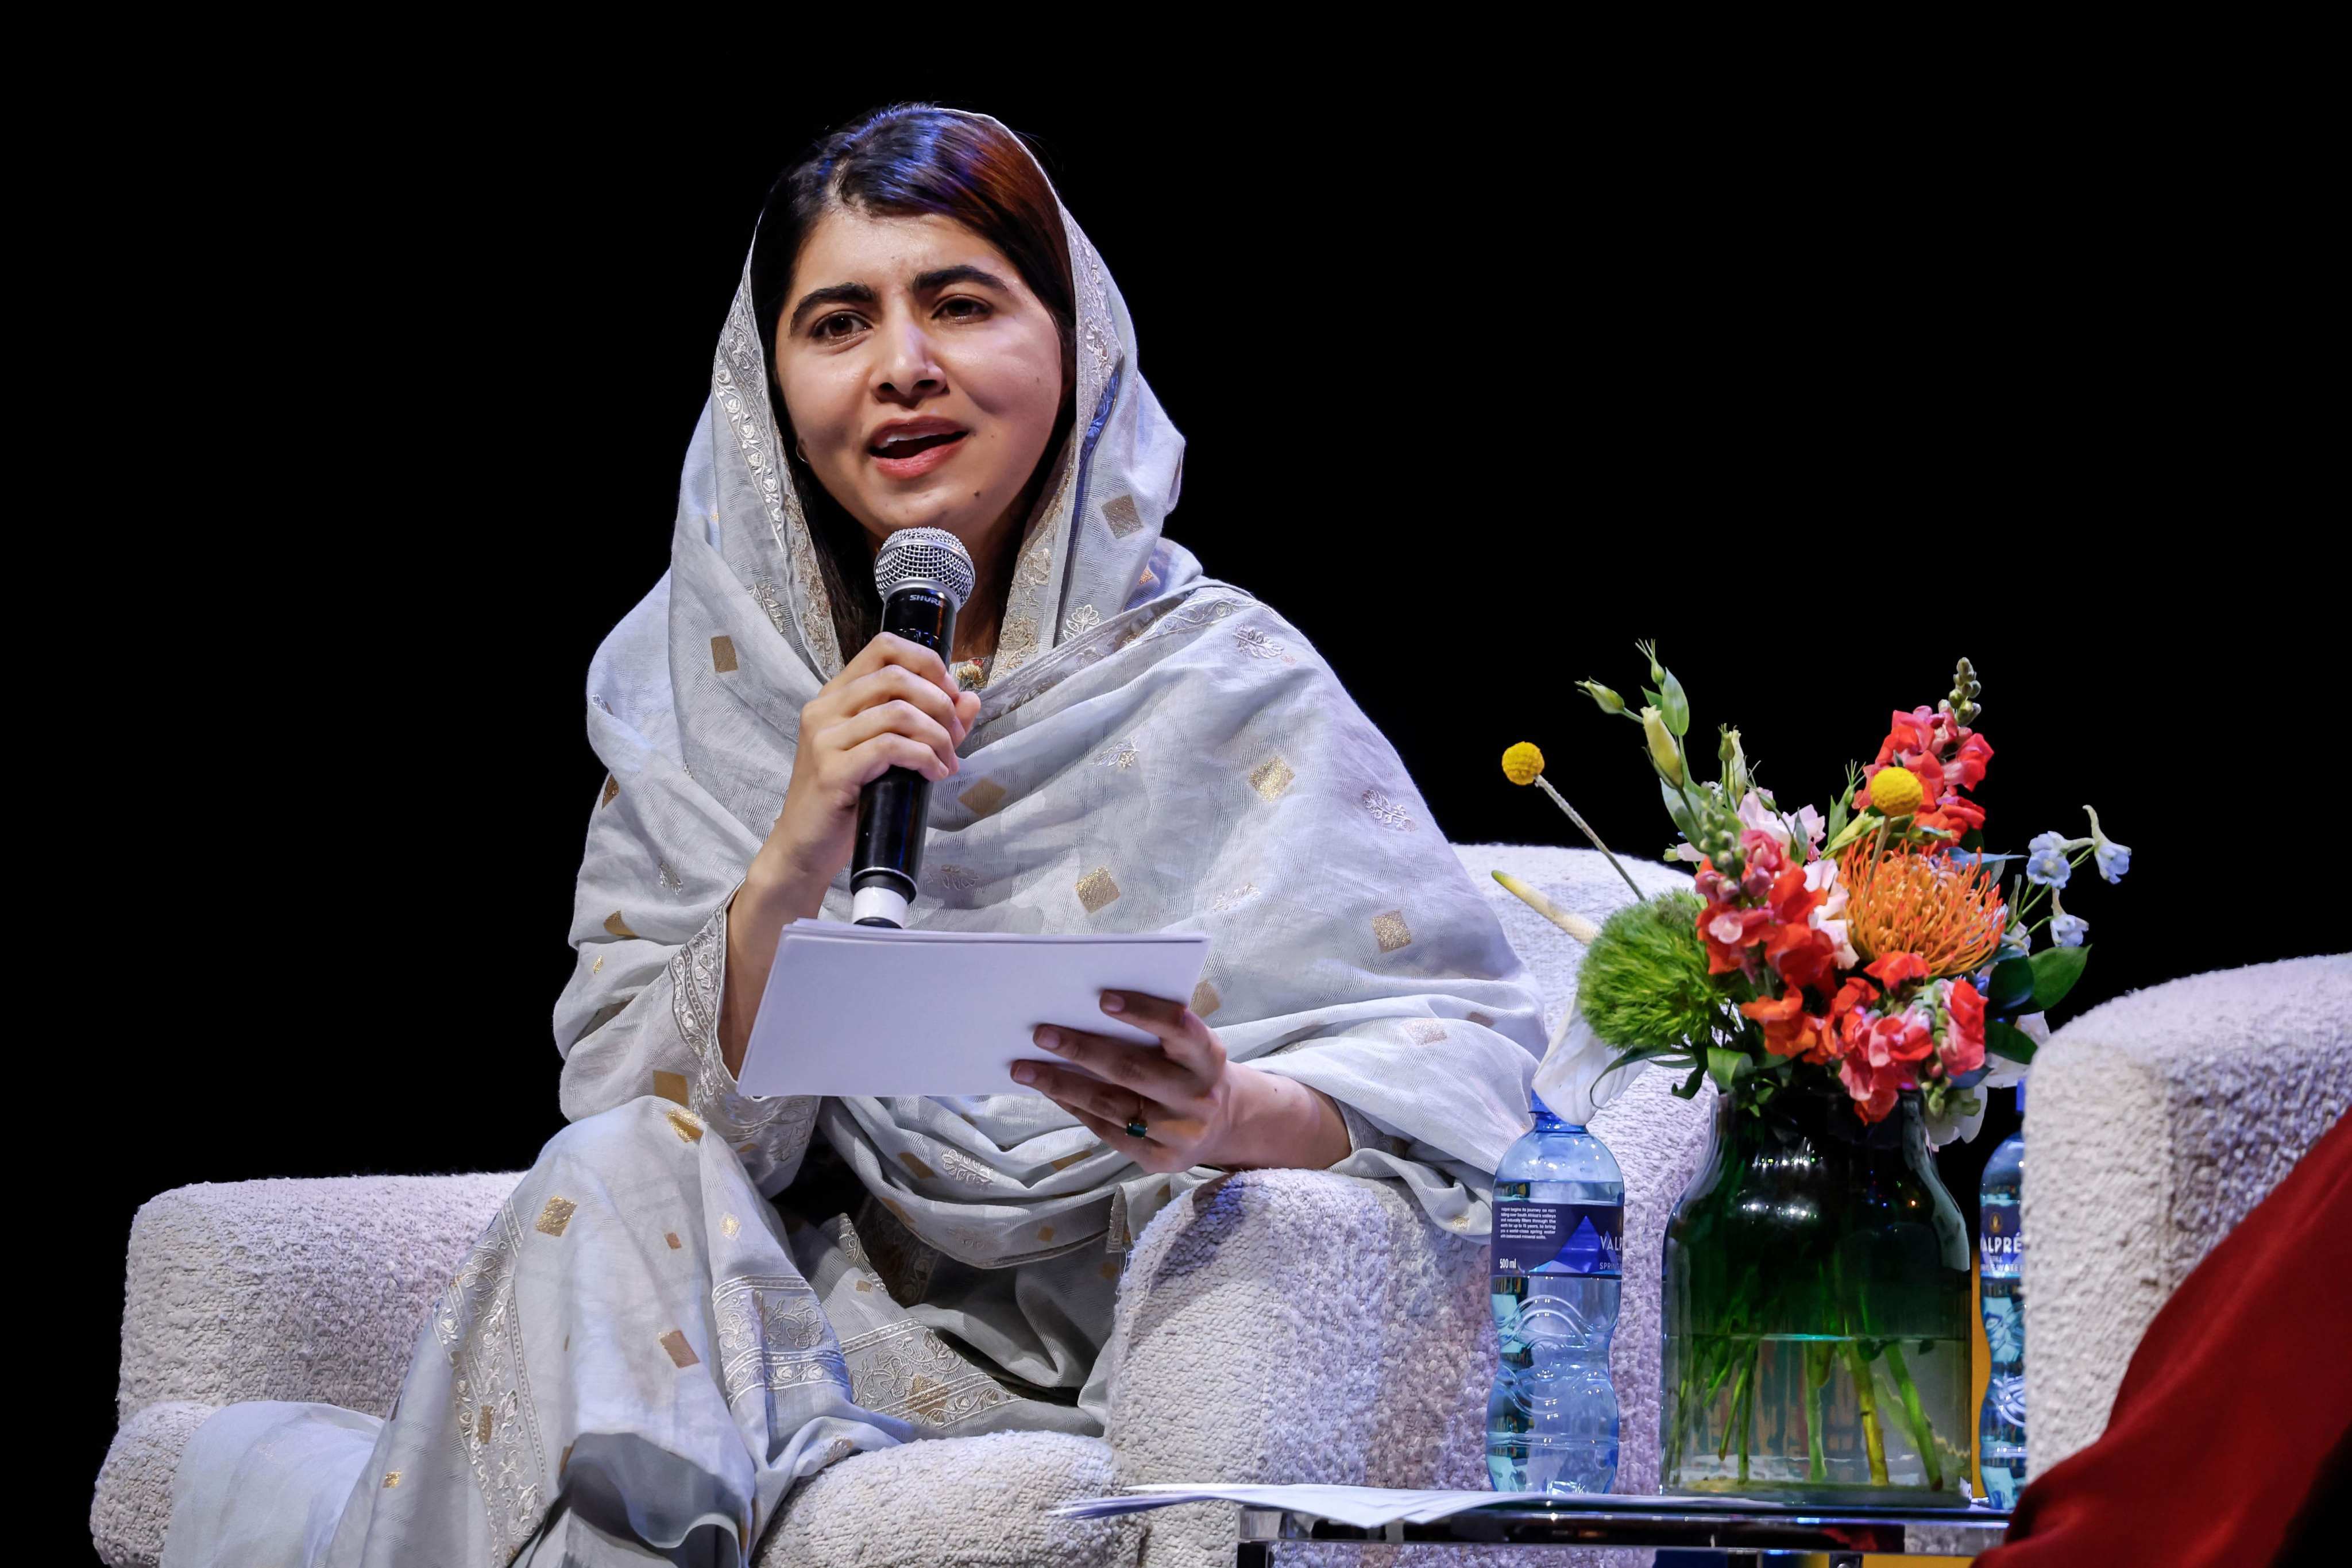 Nobel Peace Prize laureate Malala Yousafzai takes part in a panel discussion after delivering the 21st Nelson Mandela Annual Lecture in Johannesburg on Tuesday. Photo: AFP